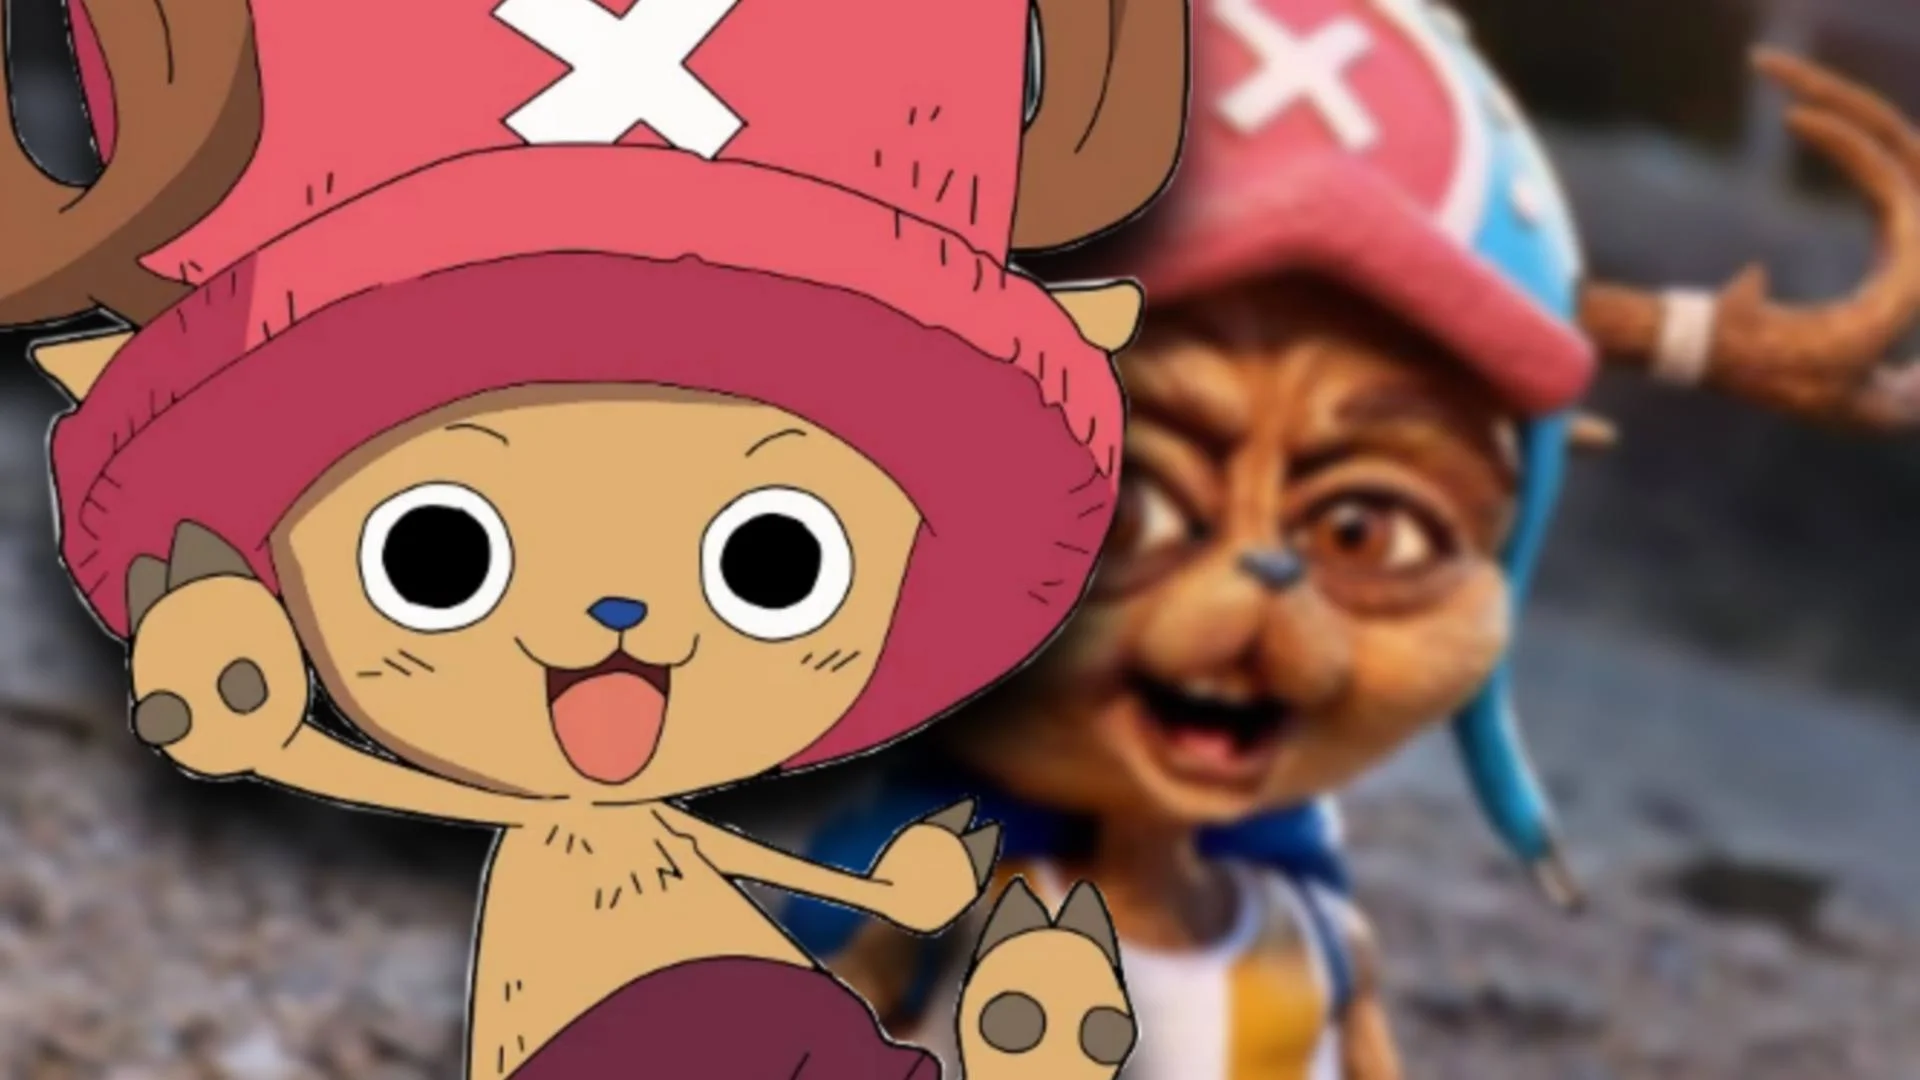 Behind the Scenes Peek: How 'One Piece' Plans to Bring Chopper to Life in Upcoming Live-Action Season